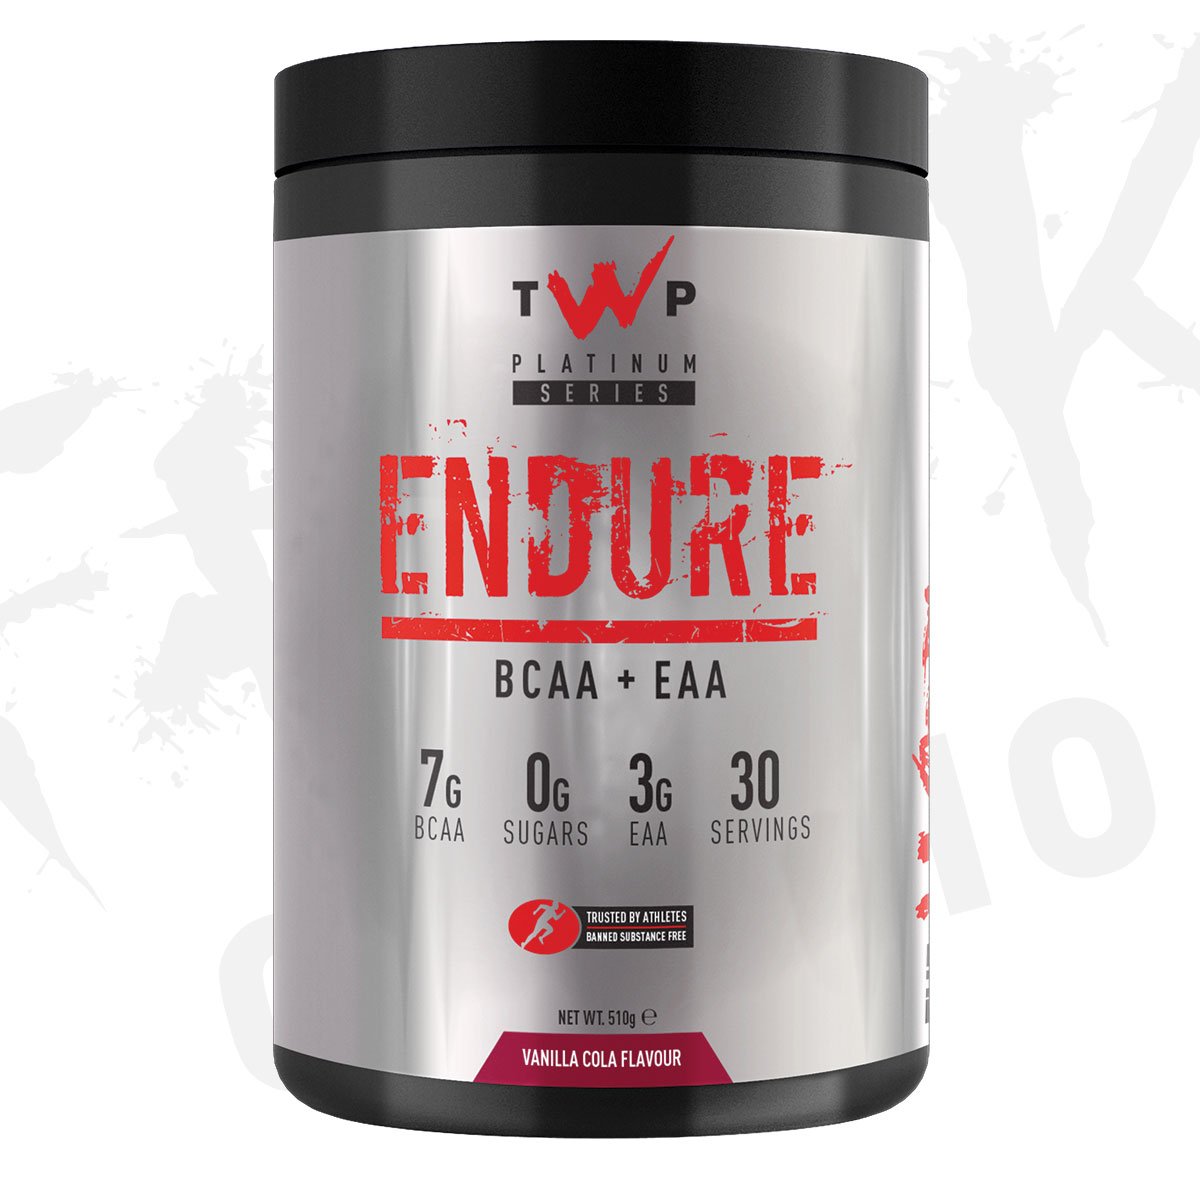 The Warrior Project - Endure BCAA + EAA 510g | 30 Servings